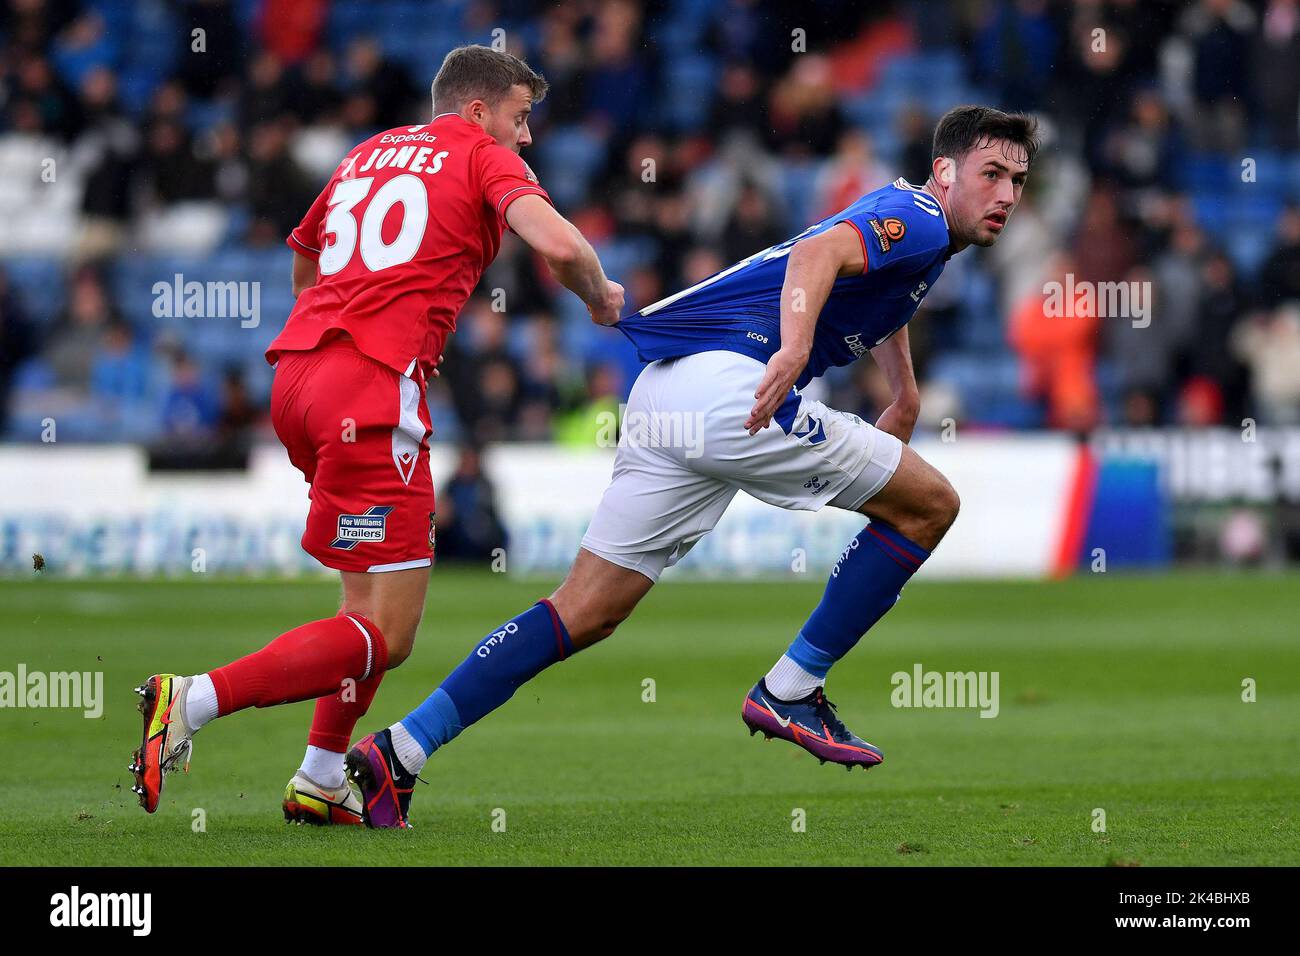 Oldham, UK. 1st October 2022during the Vanarama National League match between Oldham Athletic and Wrexham at Boundary Park, Oldham on Saturday 1st October 2022James Carragher of Oldham Athletic during the Vanarama National League match between Oldham Athletic and Wrexham at Boundary Park, Oldham on Saturday 1st October 2022. Credit: MI News & Sport /Alamy Live News Stock Photo